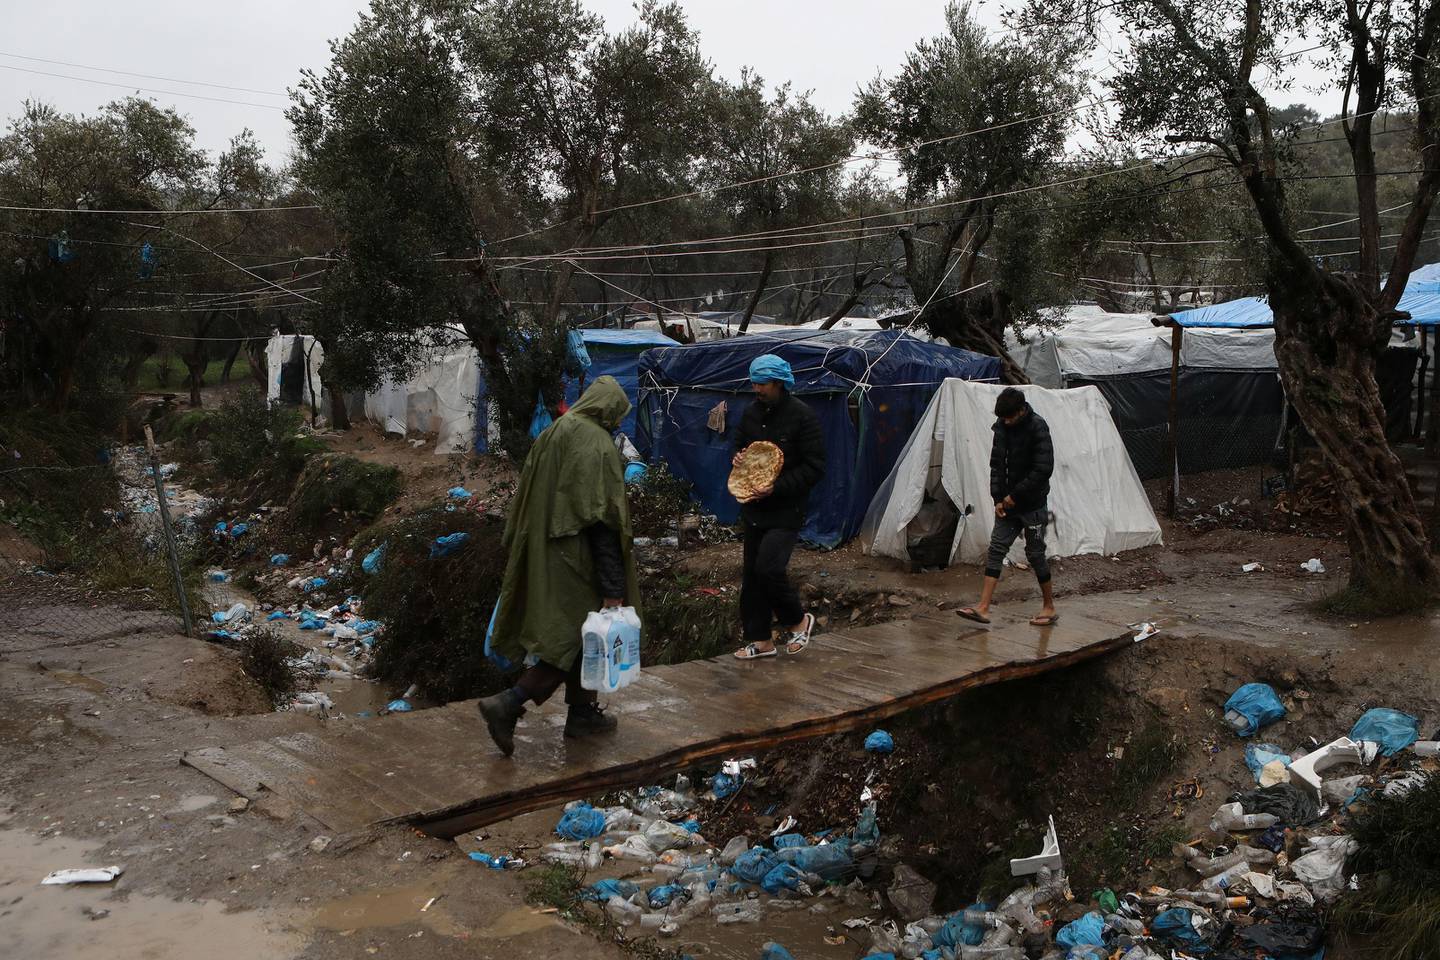 Migrants make their way during heavy rainfall at a temporary camp for refugees and migrants next to the Moria camp on the island of Lesbos, Greece, February 6, 2020. REUTERS/Elias Marcou